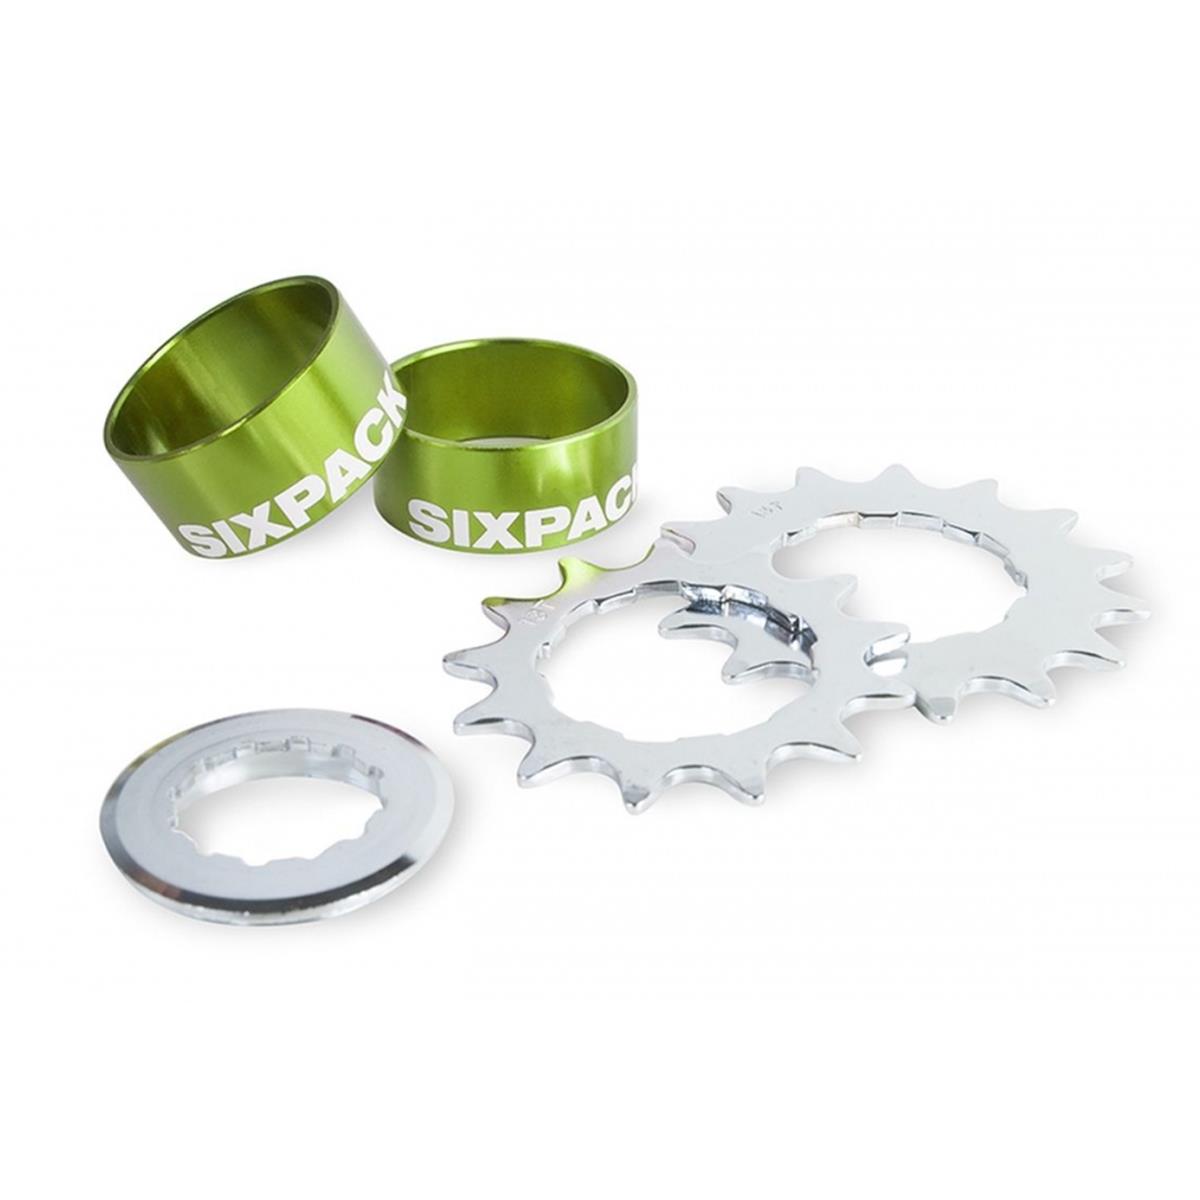 Sixpack Kit de conversion Single Speed  Electric Green, incl. 2 Chainrings (13 & 15T), fits 8/9710-speed Shimano/Sram Freewheels